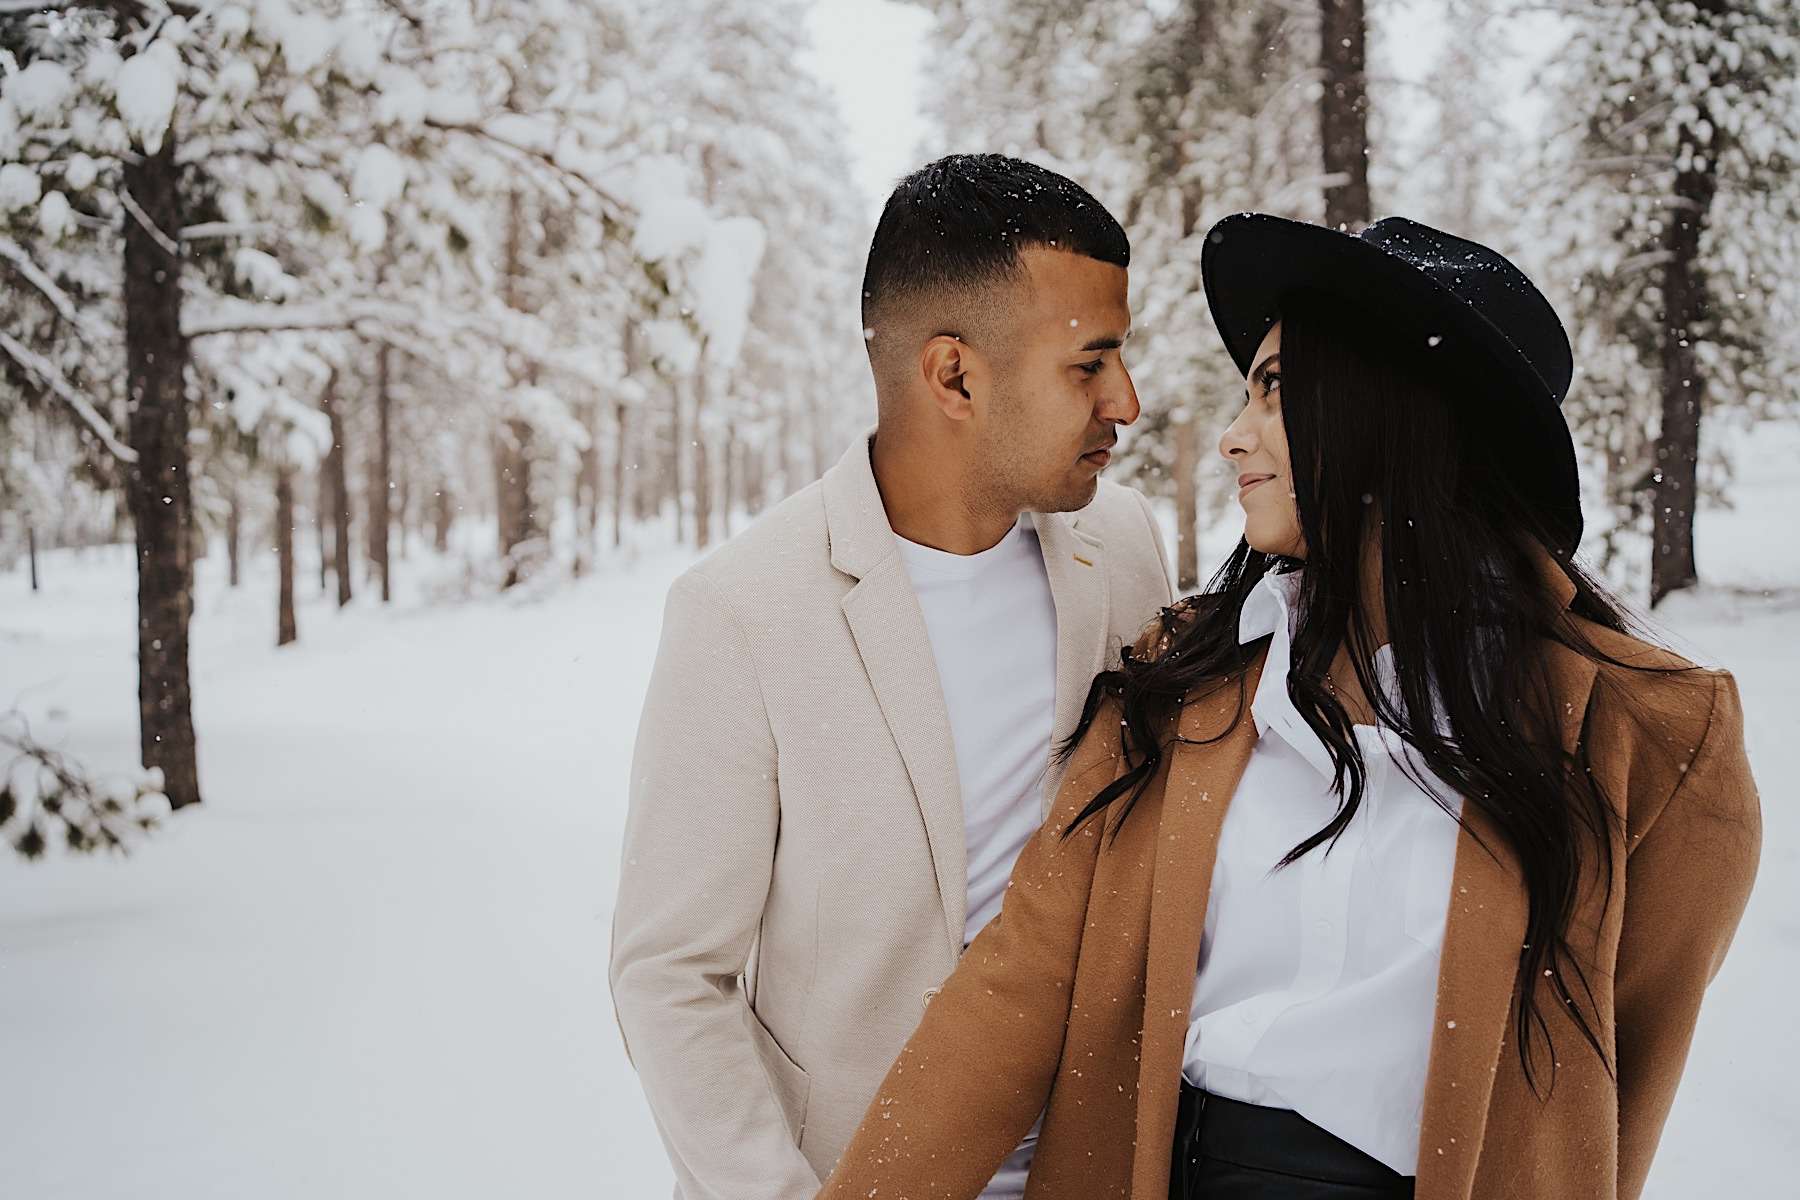 Couple in snow together